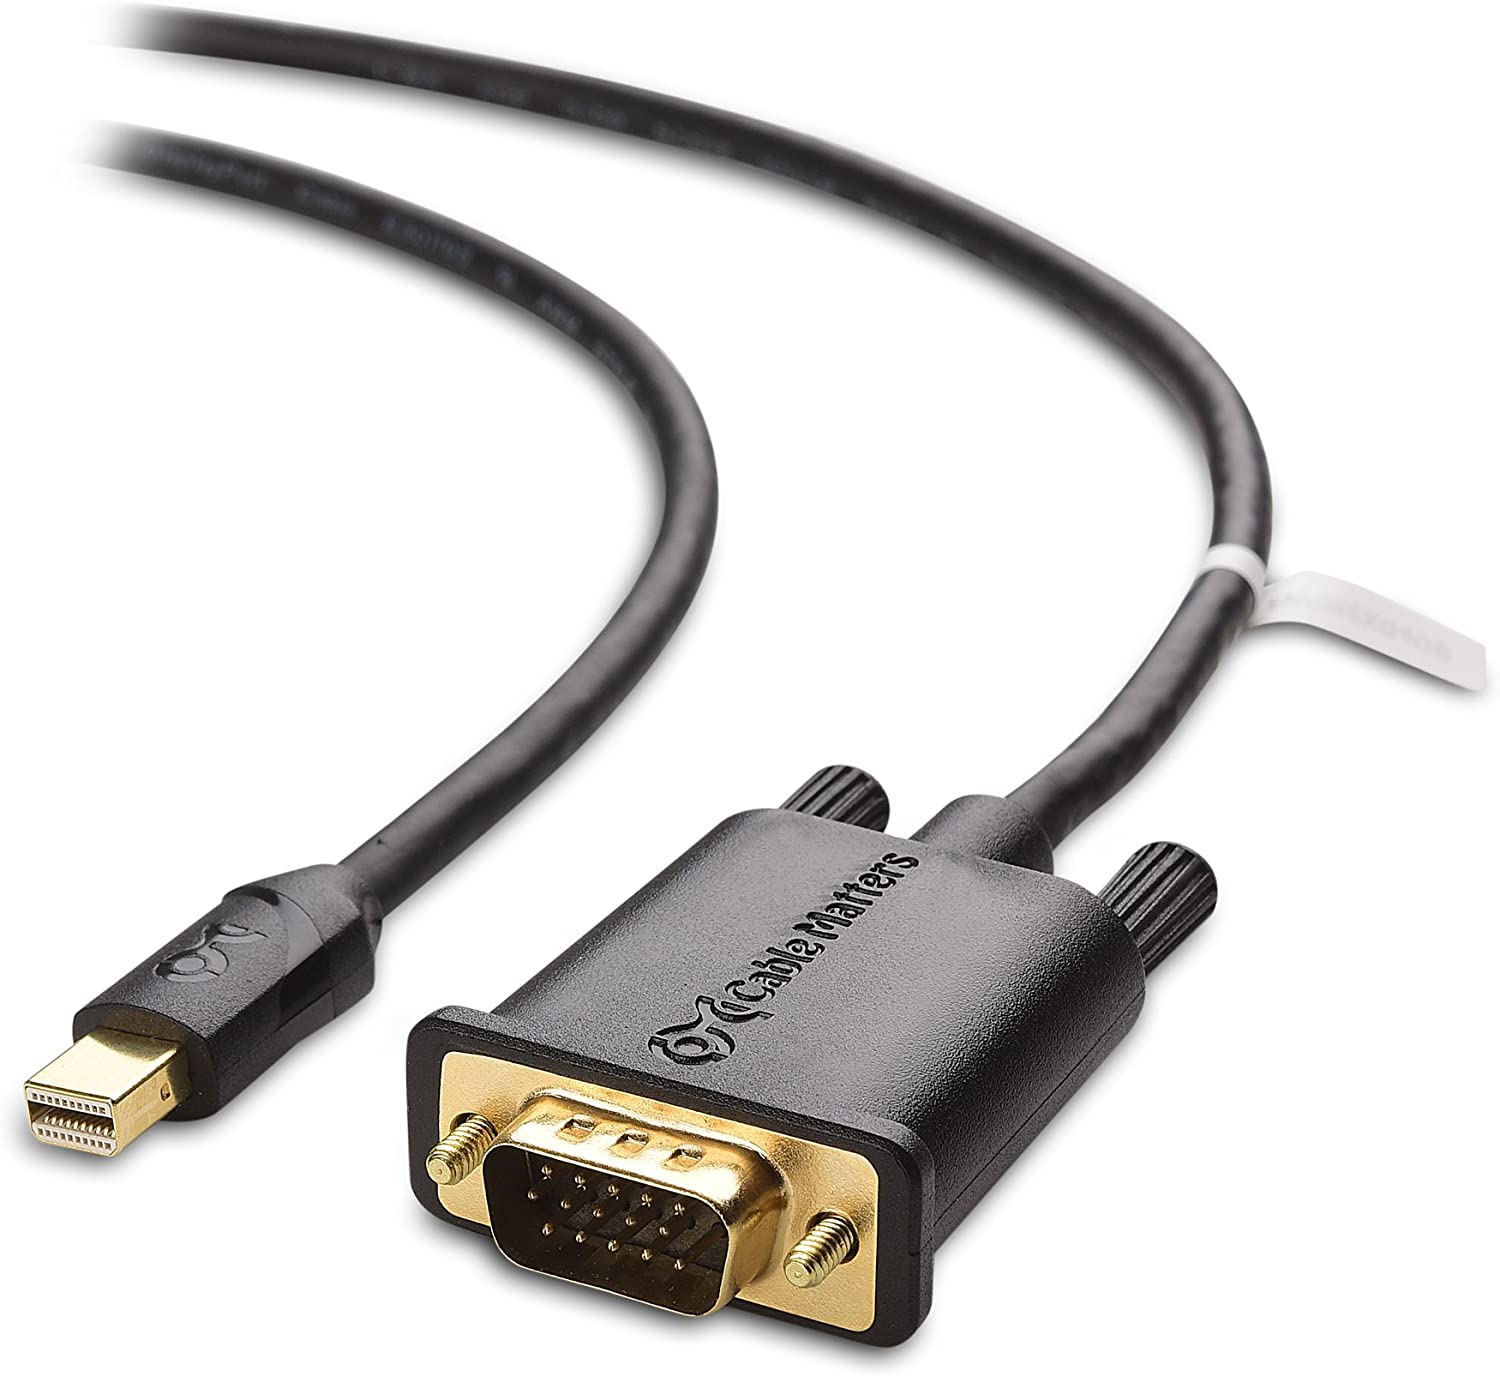  Cable Matters DisplayPort to VGA Cable (DP to VGA Cable) 6 Feet  : Electronics